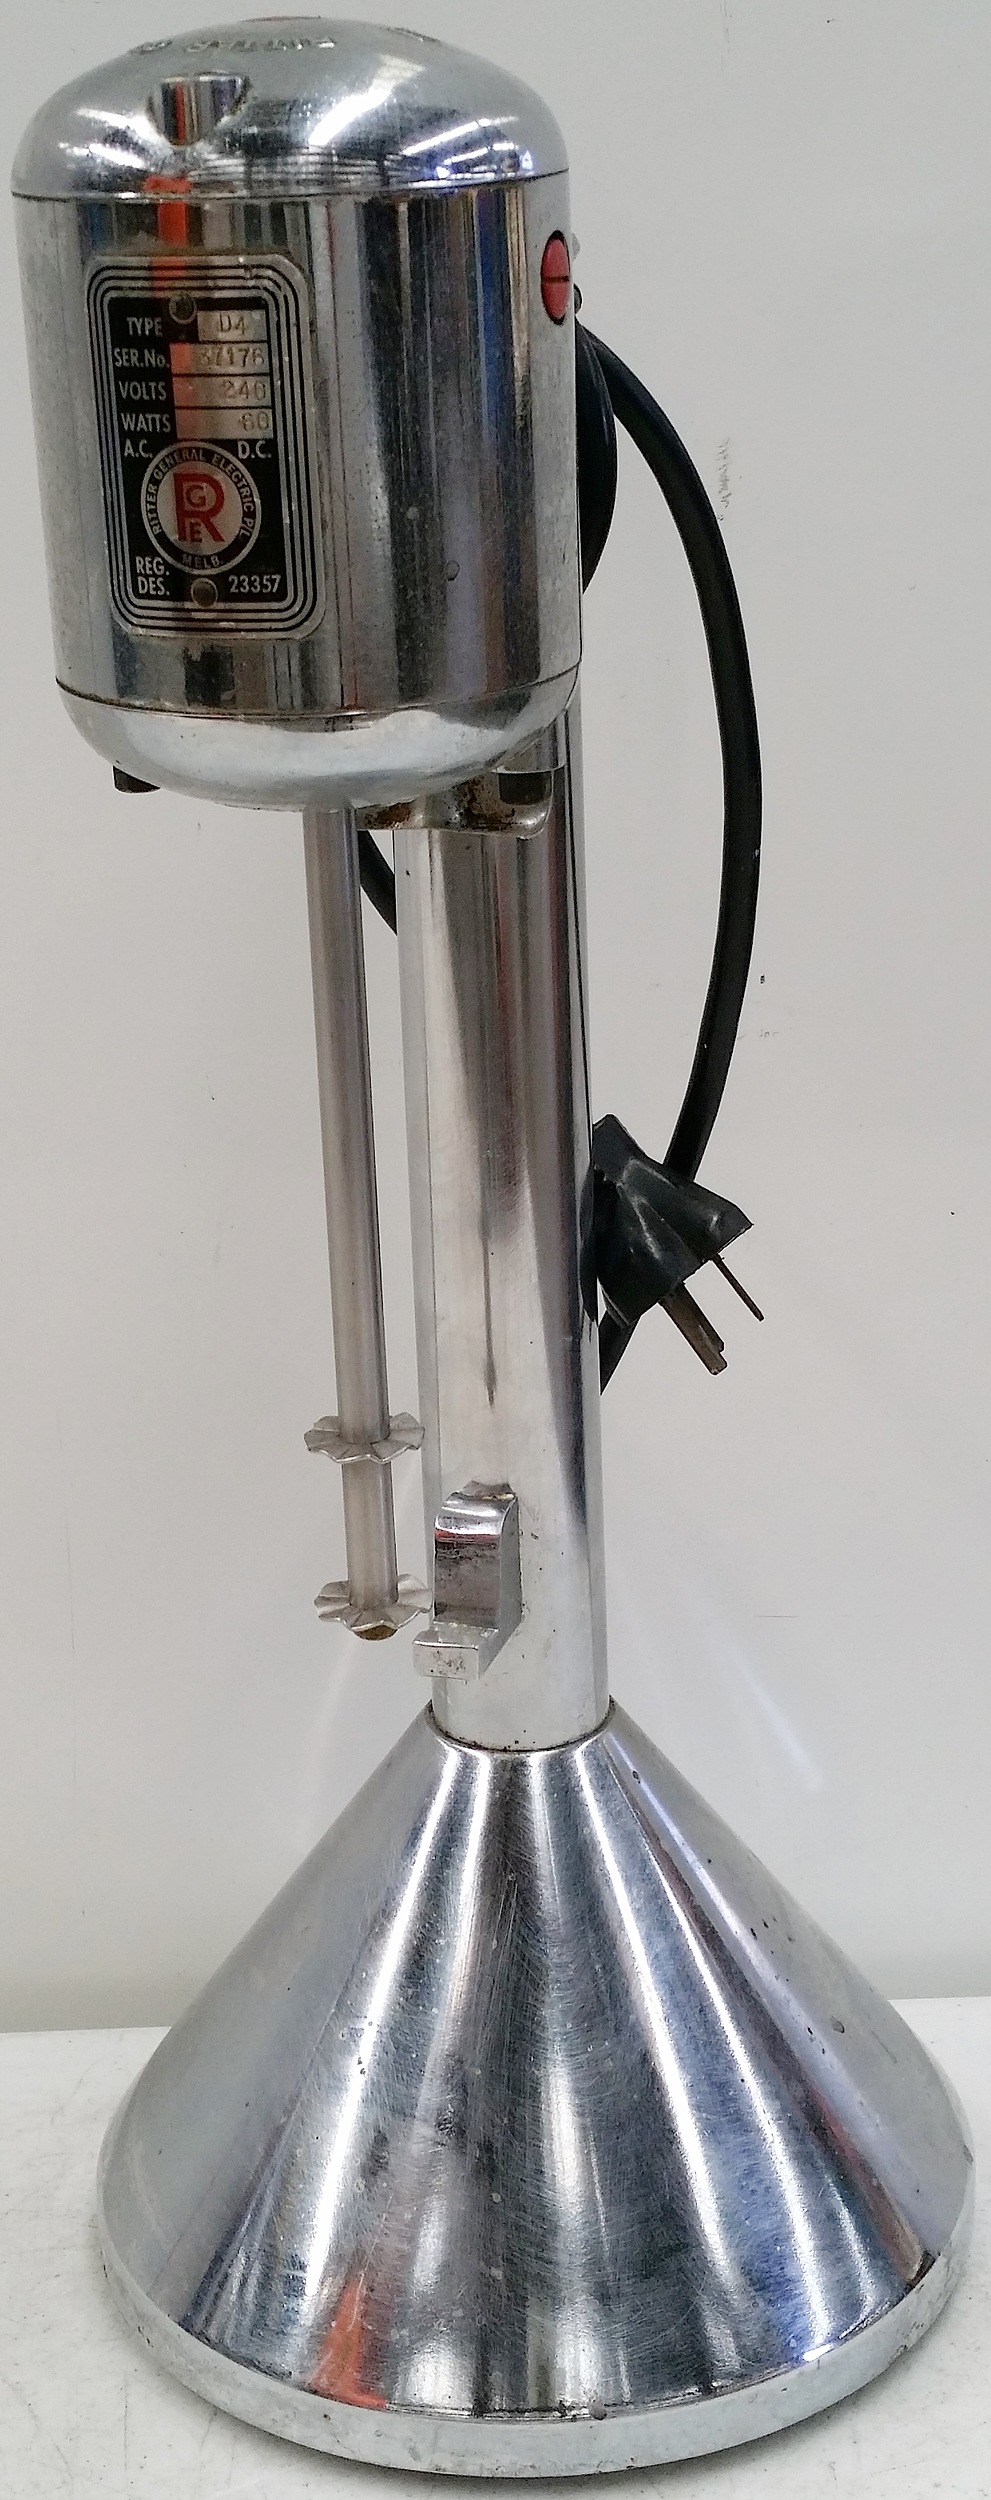 Sold at Auction: Vintage Milkshake Machine - made by Ritter General  Electric, enamelled cast iron base with chromed finish, clean example in  working order, comes with later cup.